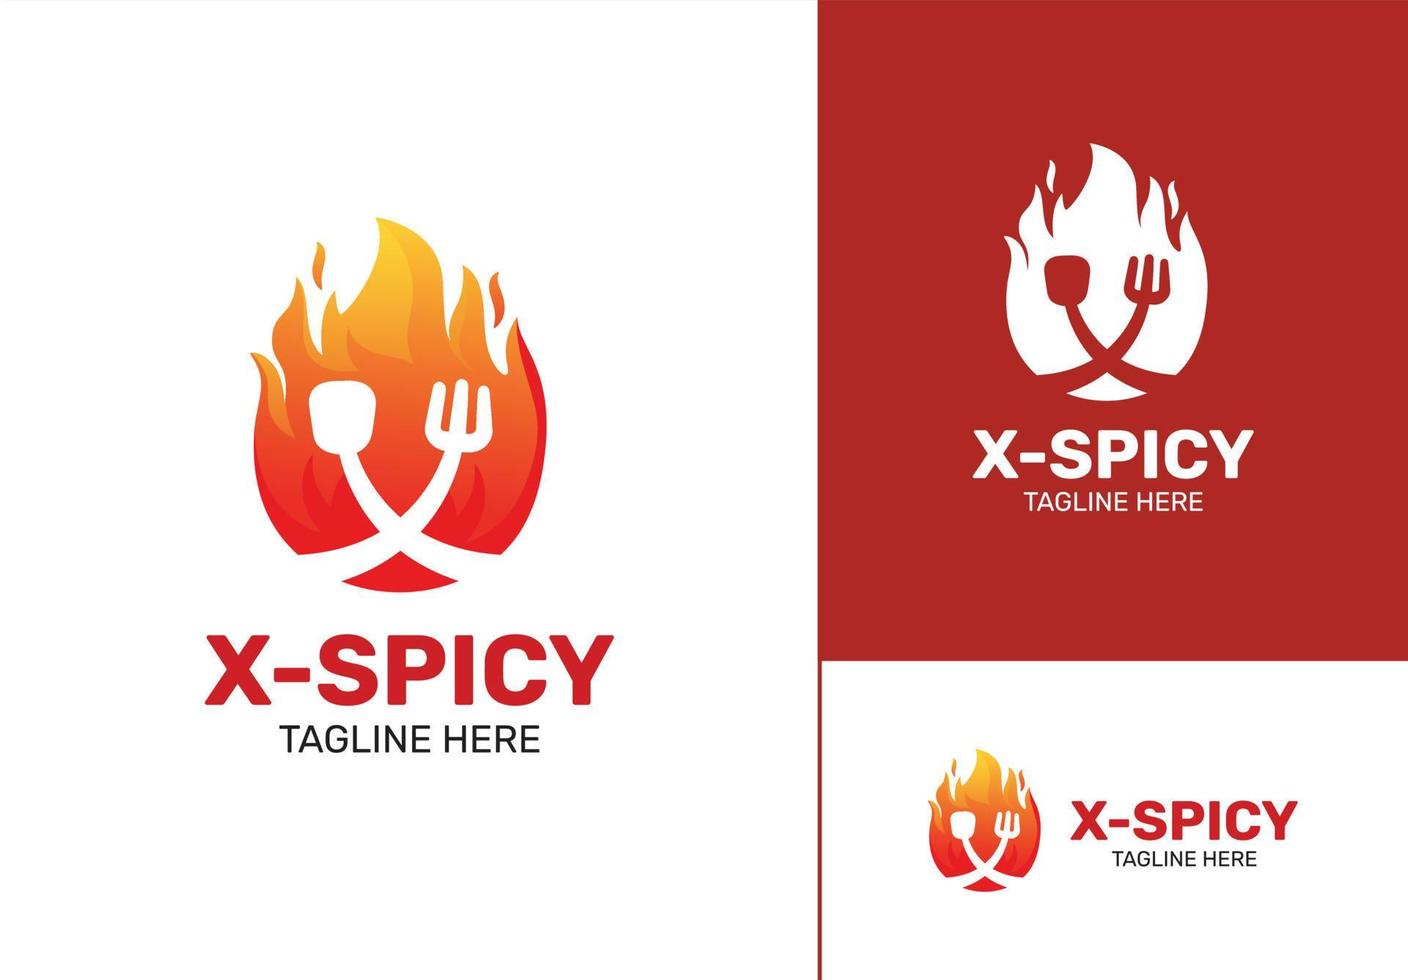 Fire logo design with spoon and fork in negative space, modern vintage logo style vector